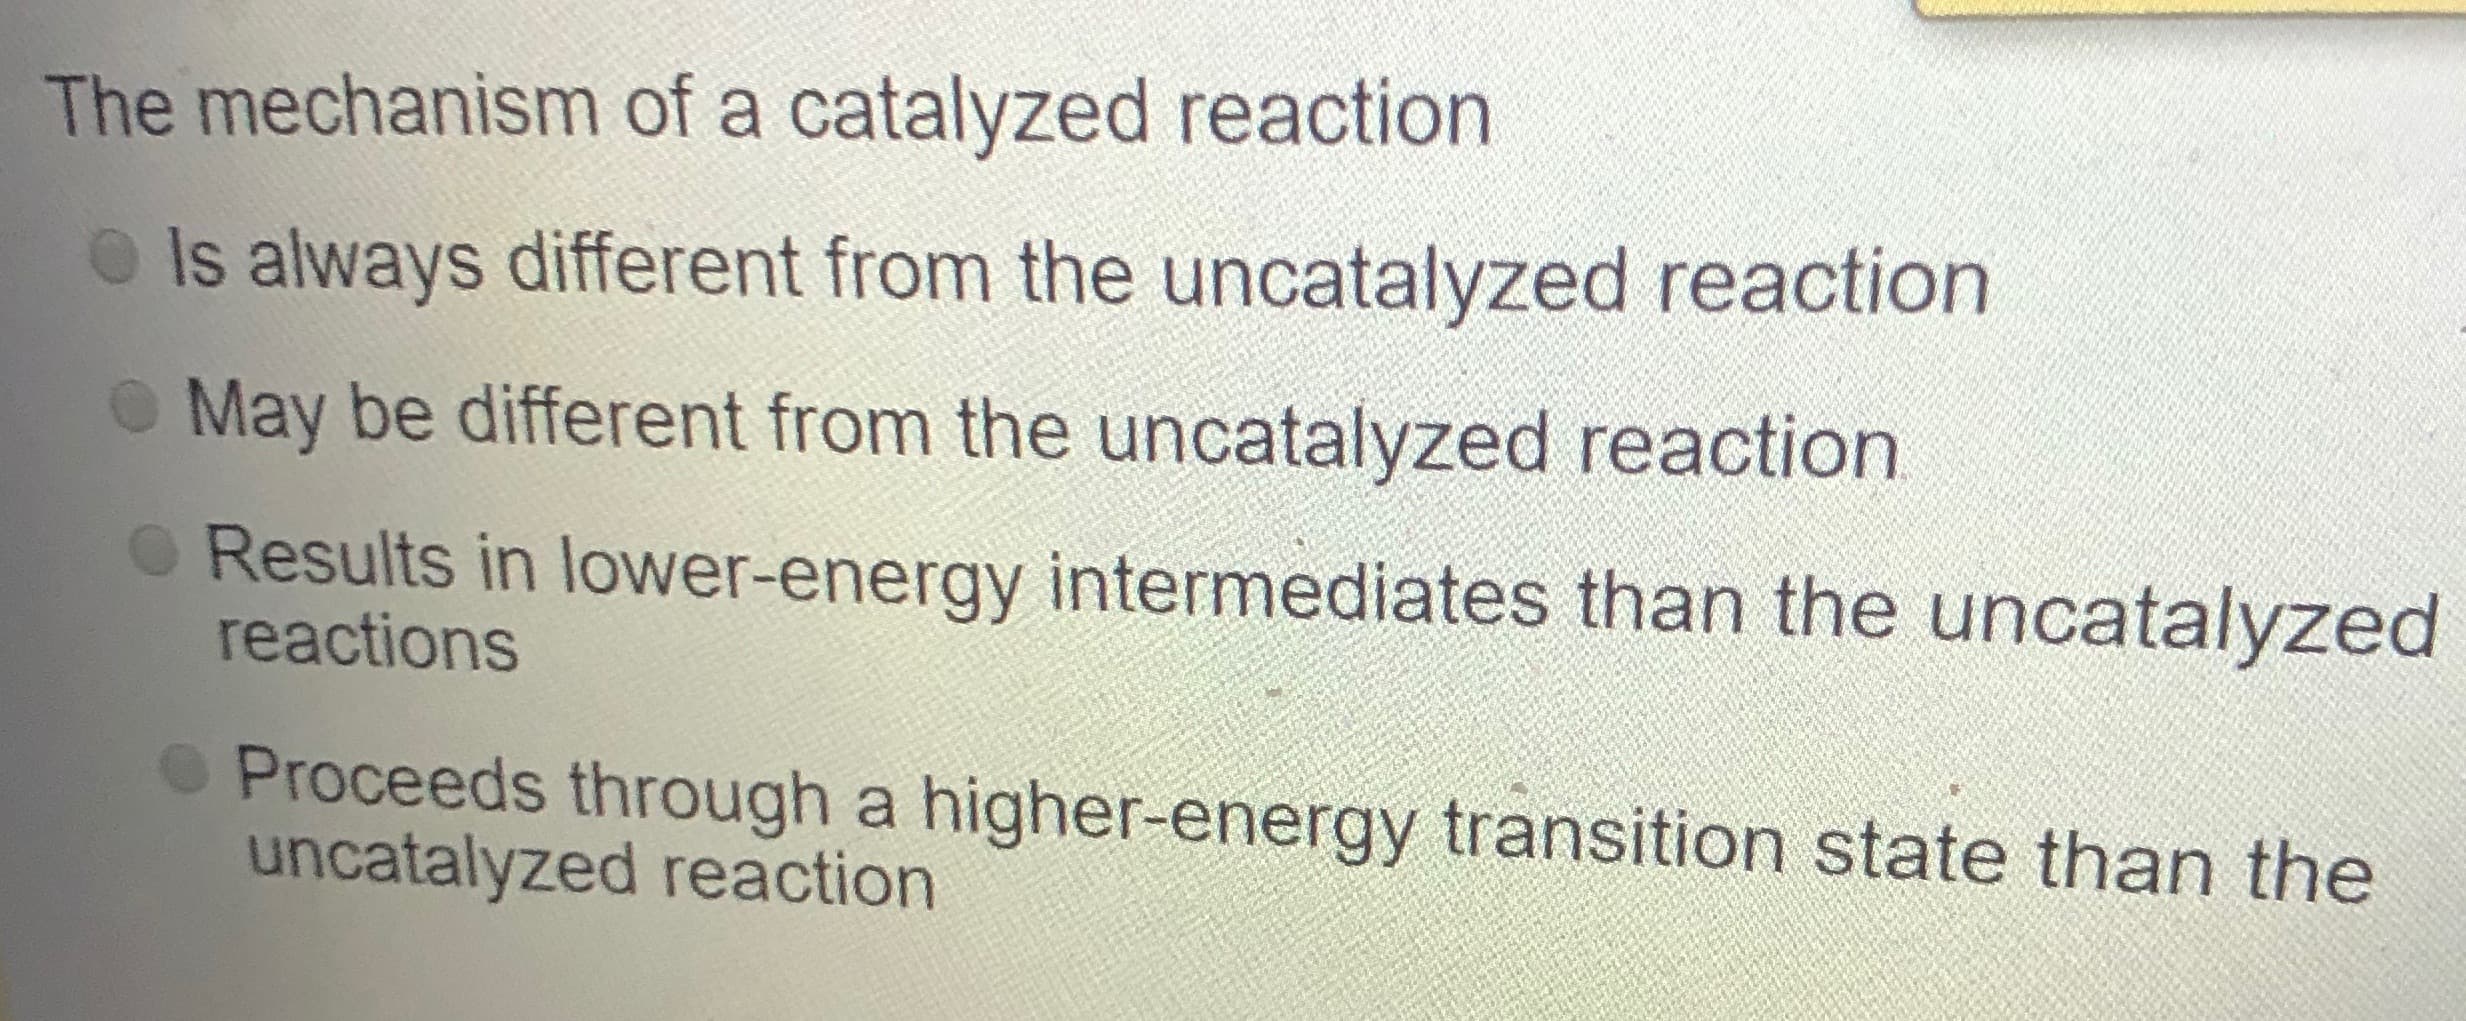 The mechanism of a catalyzed reaction
O Is always different from the uncatalyzed reaction
O May be different from the uncatalyzed reaction
O Results in lower-energy intermediates than the uncatalyzed
reactions
OProceeds through a higher-energy transition state than the
uncatalyzed reaction
